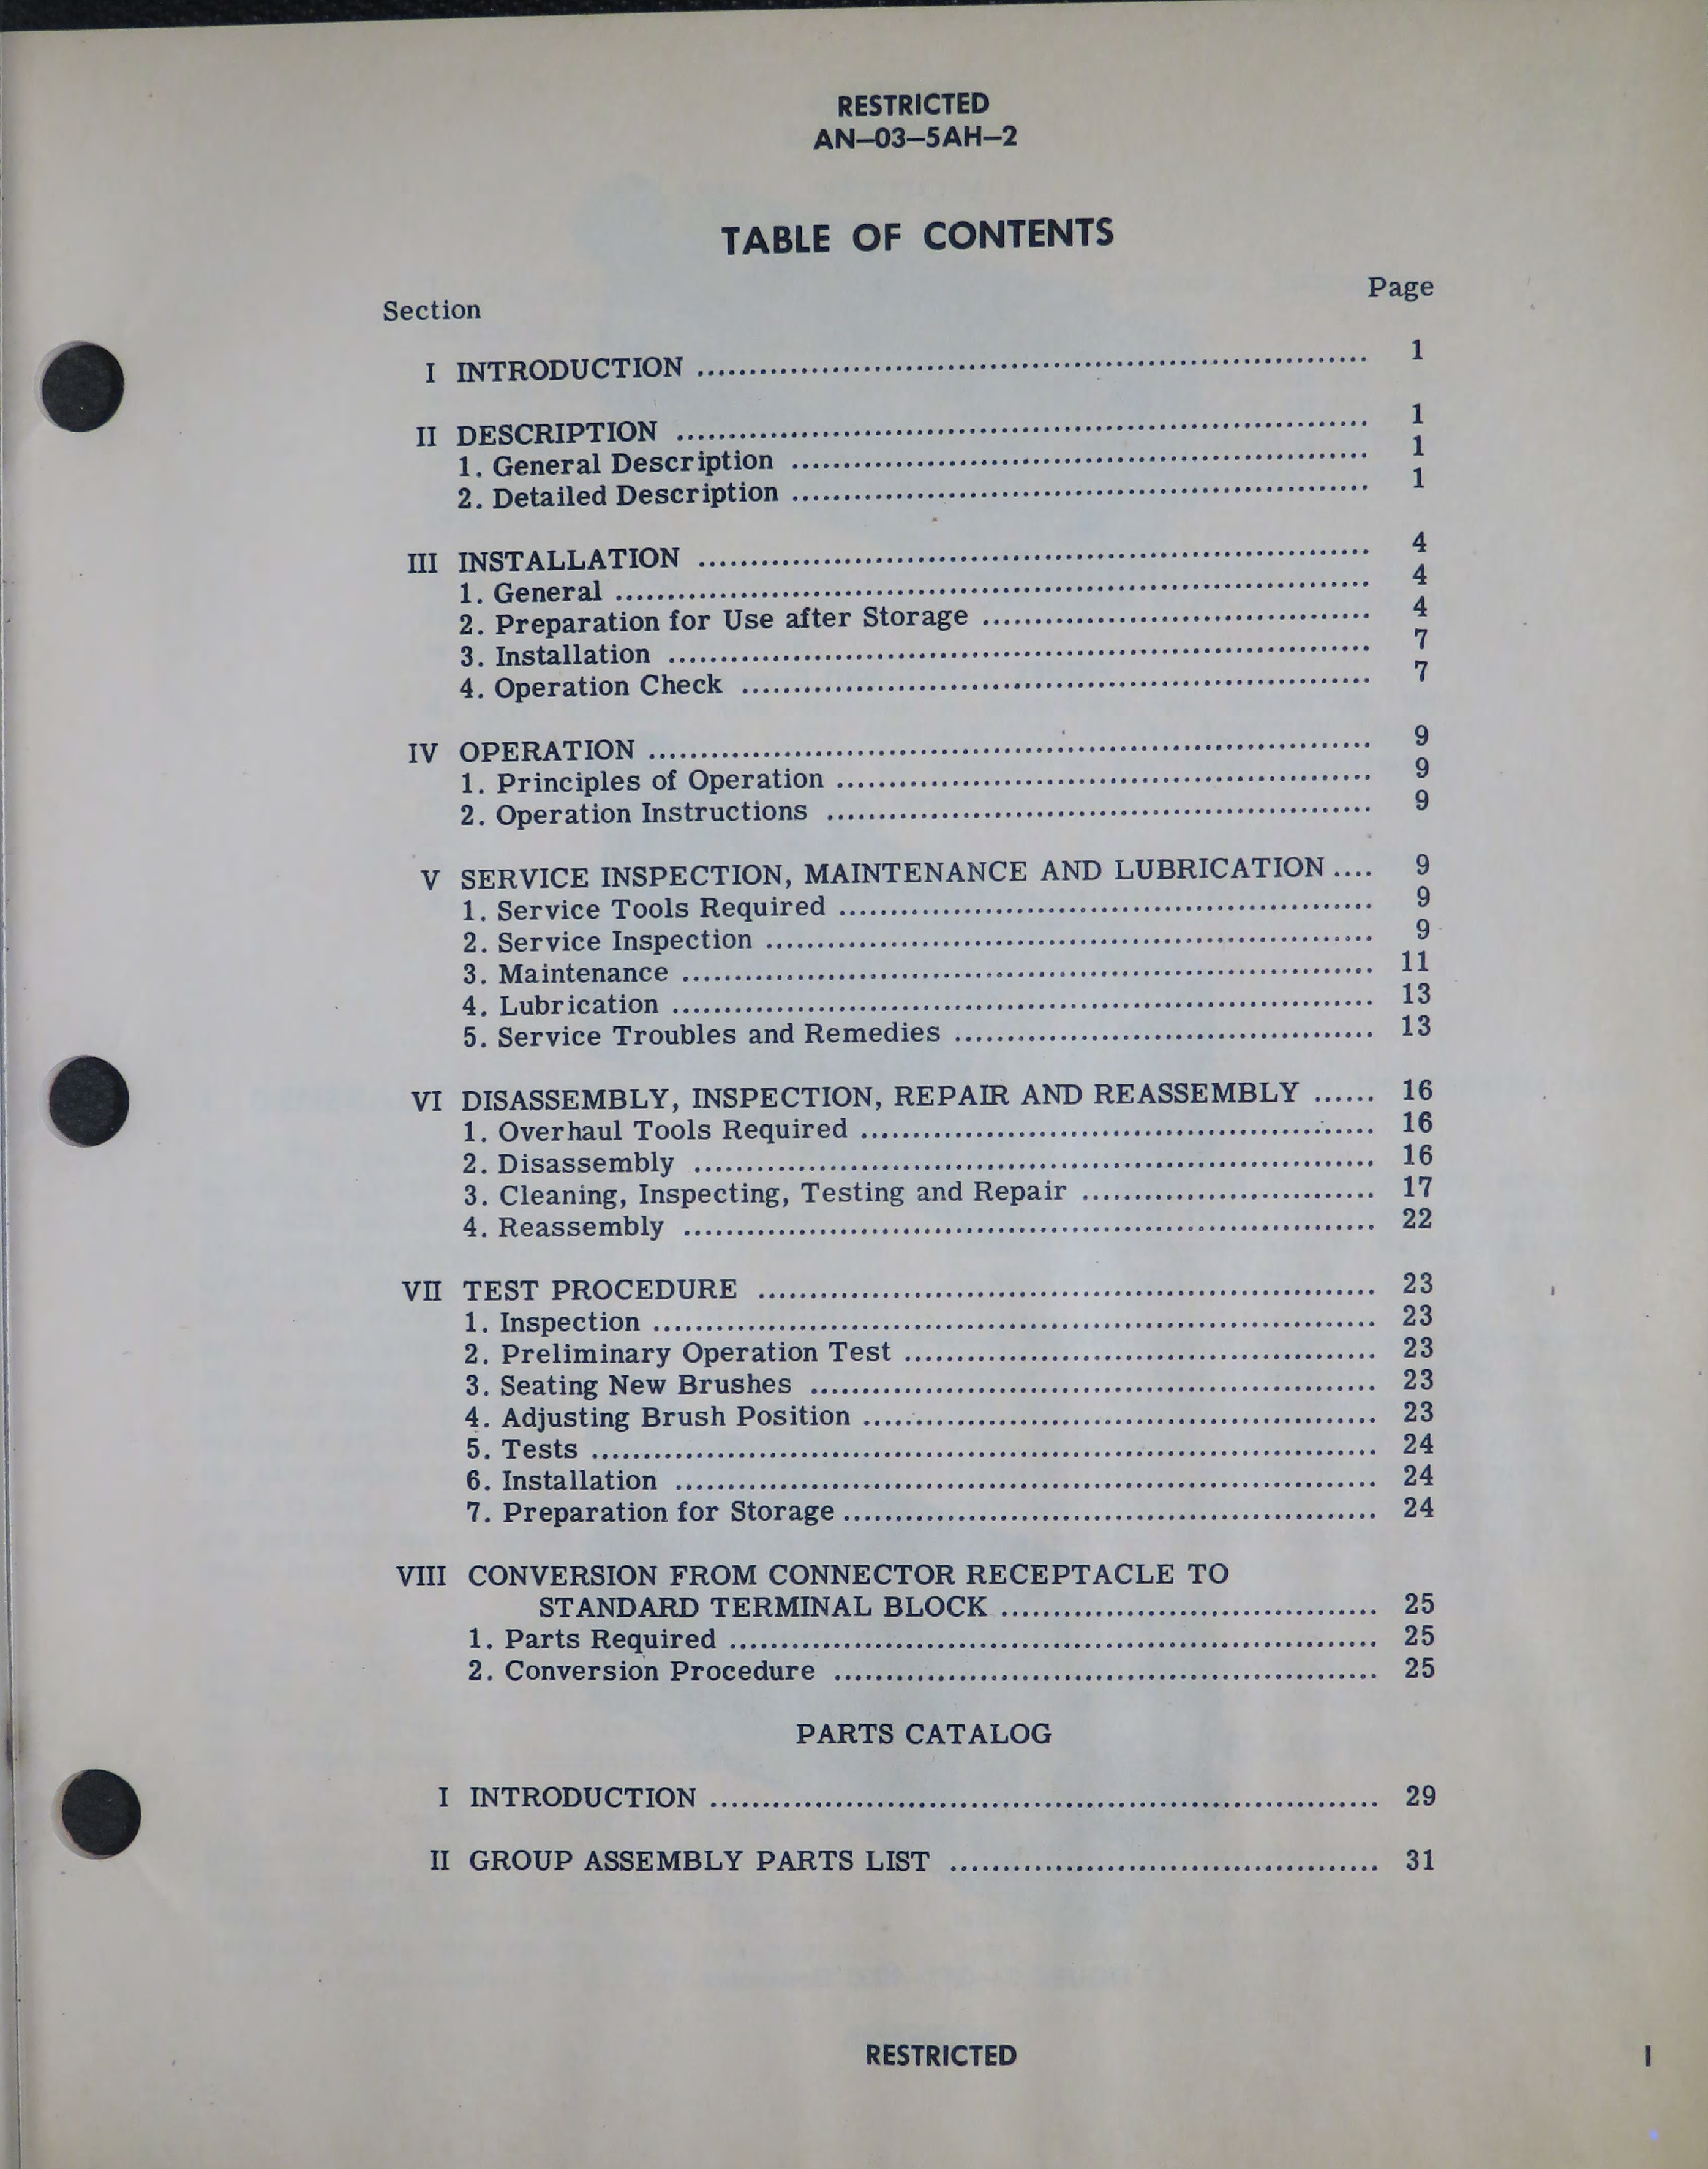 Sample page 5 from AirCorps Library document: Handbook of Instructions with Parts Catalog for Main Engine Driven Generators